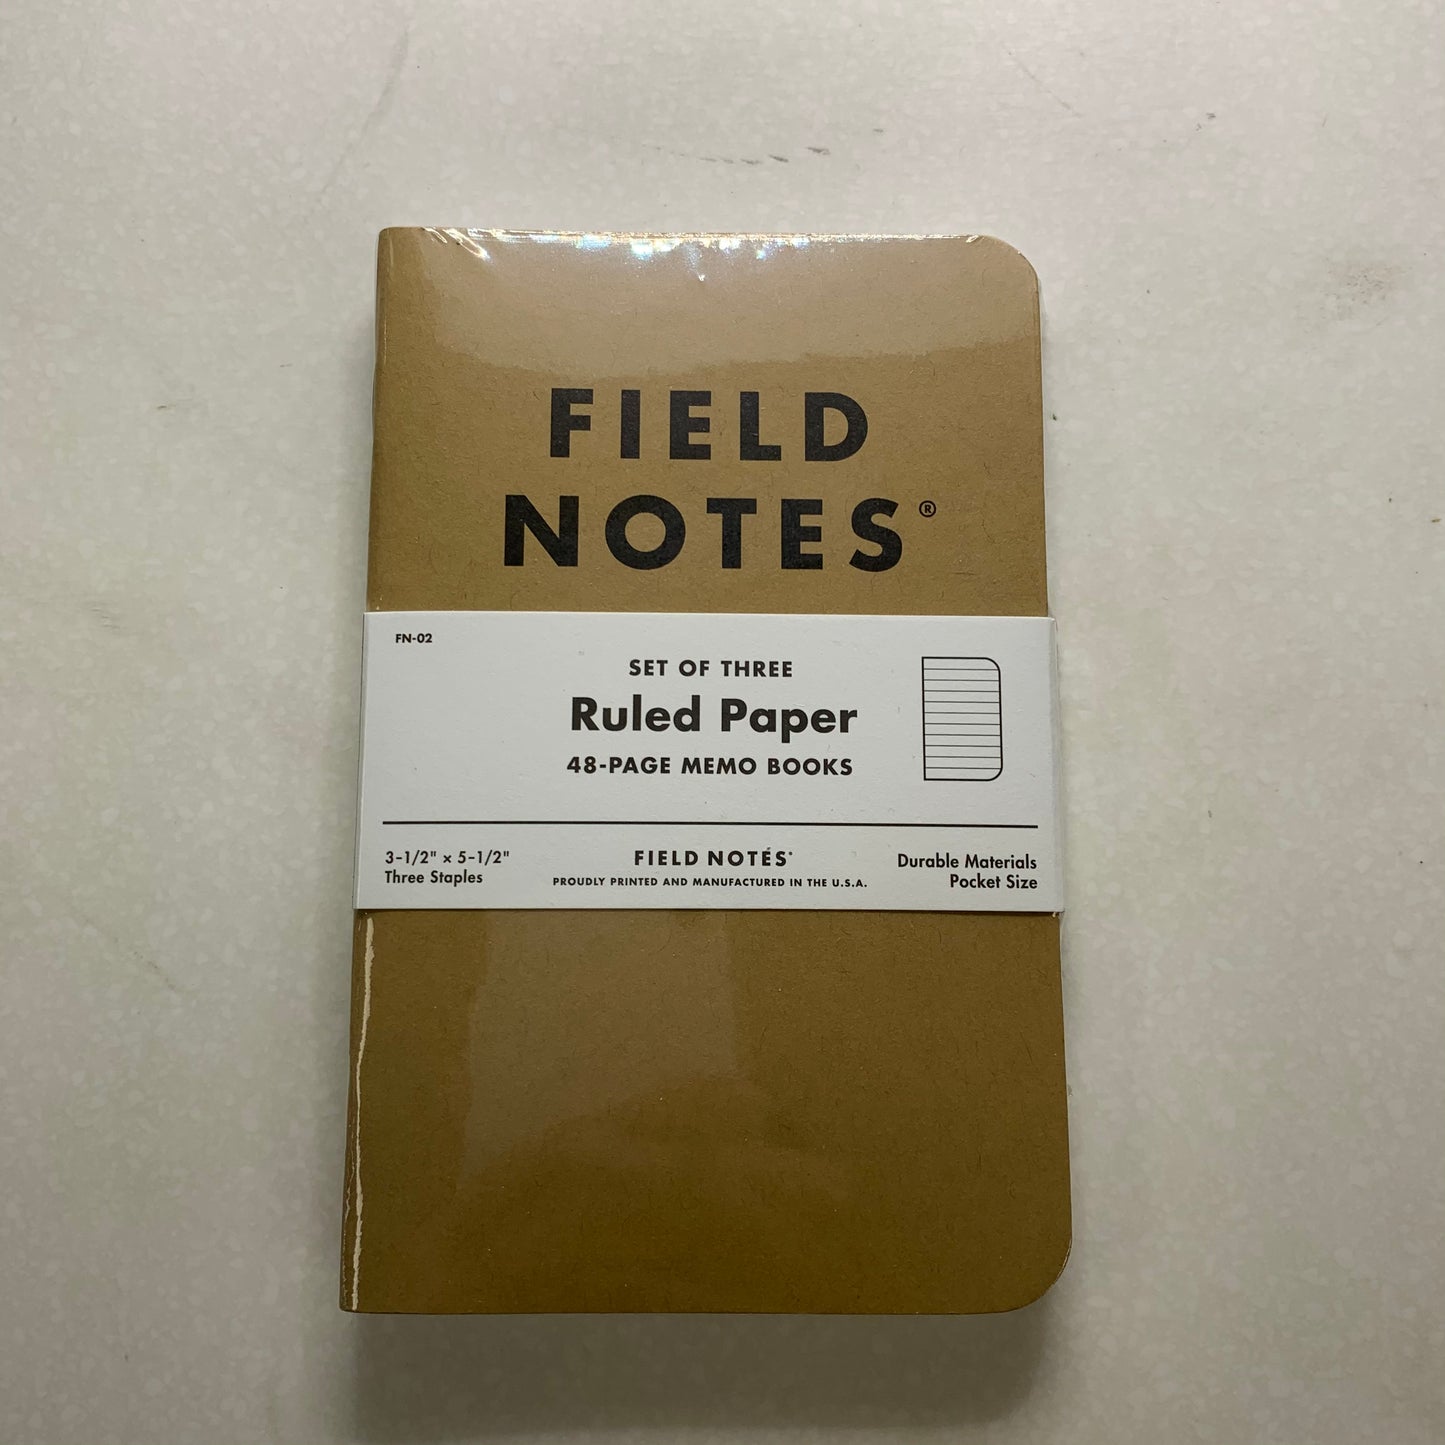 Field Noted Ruled Paper Memo Books